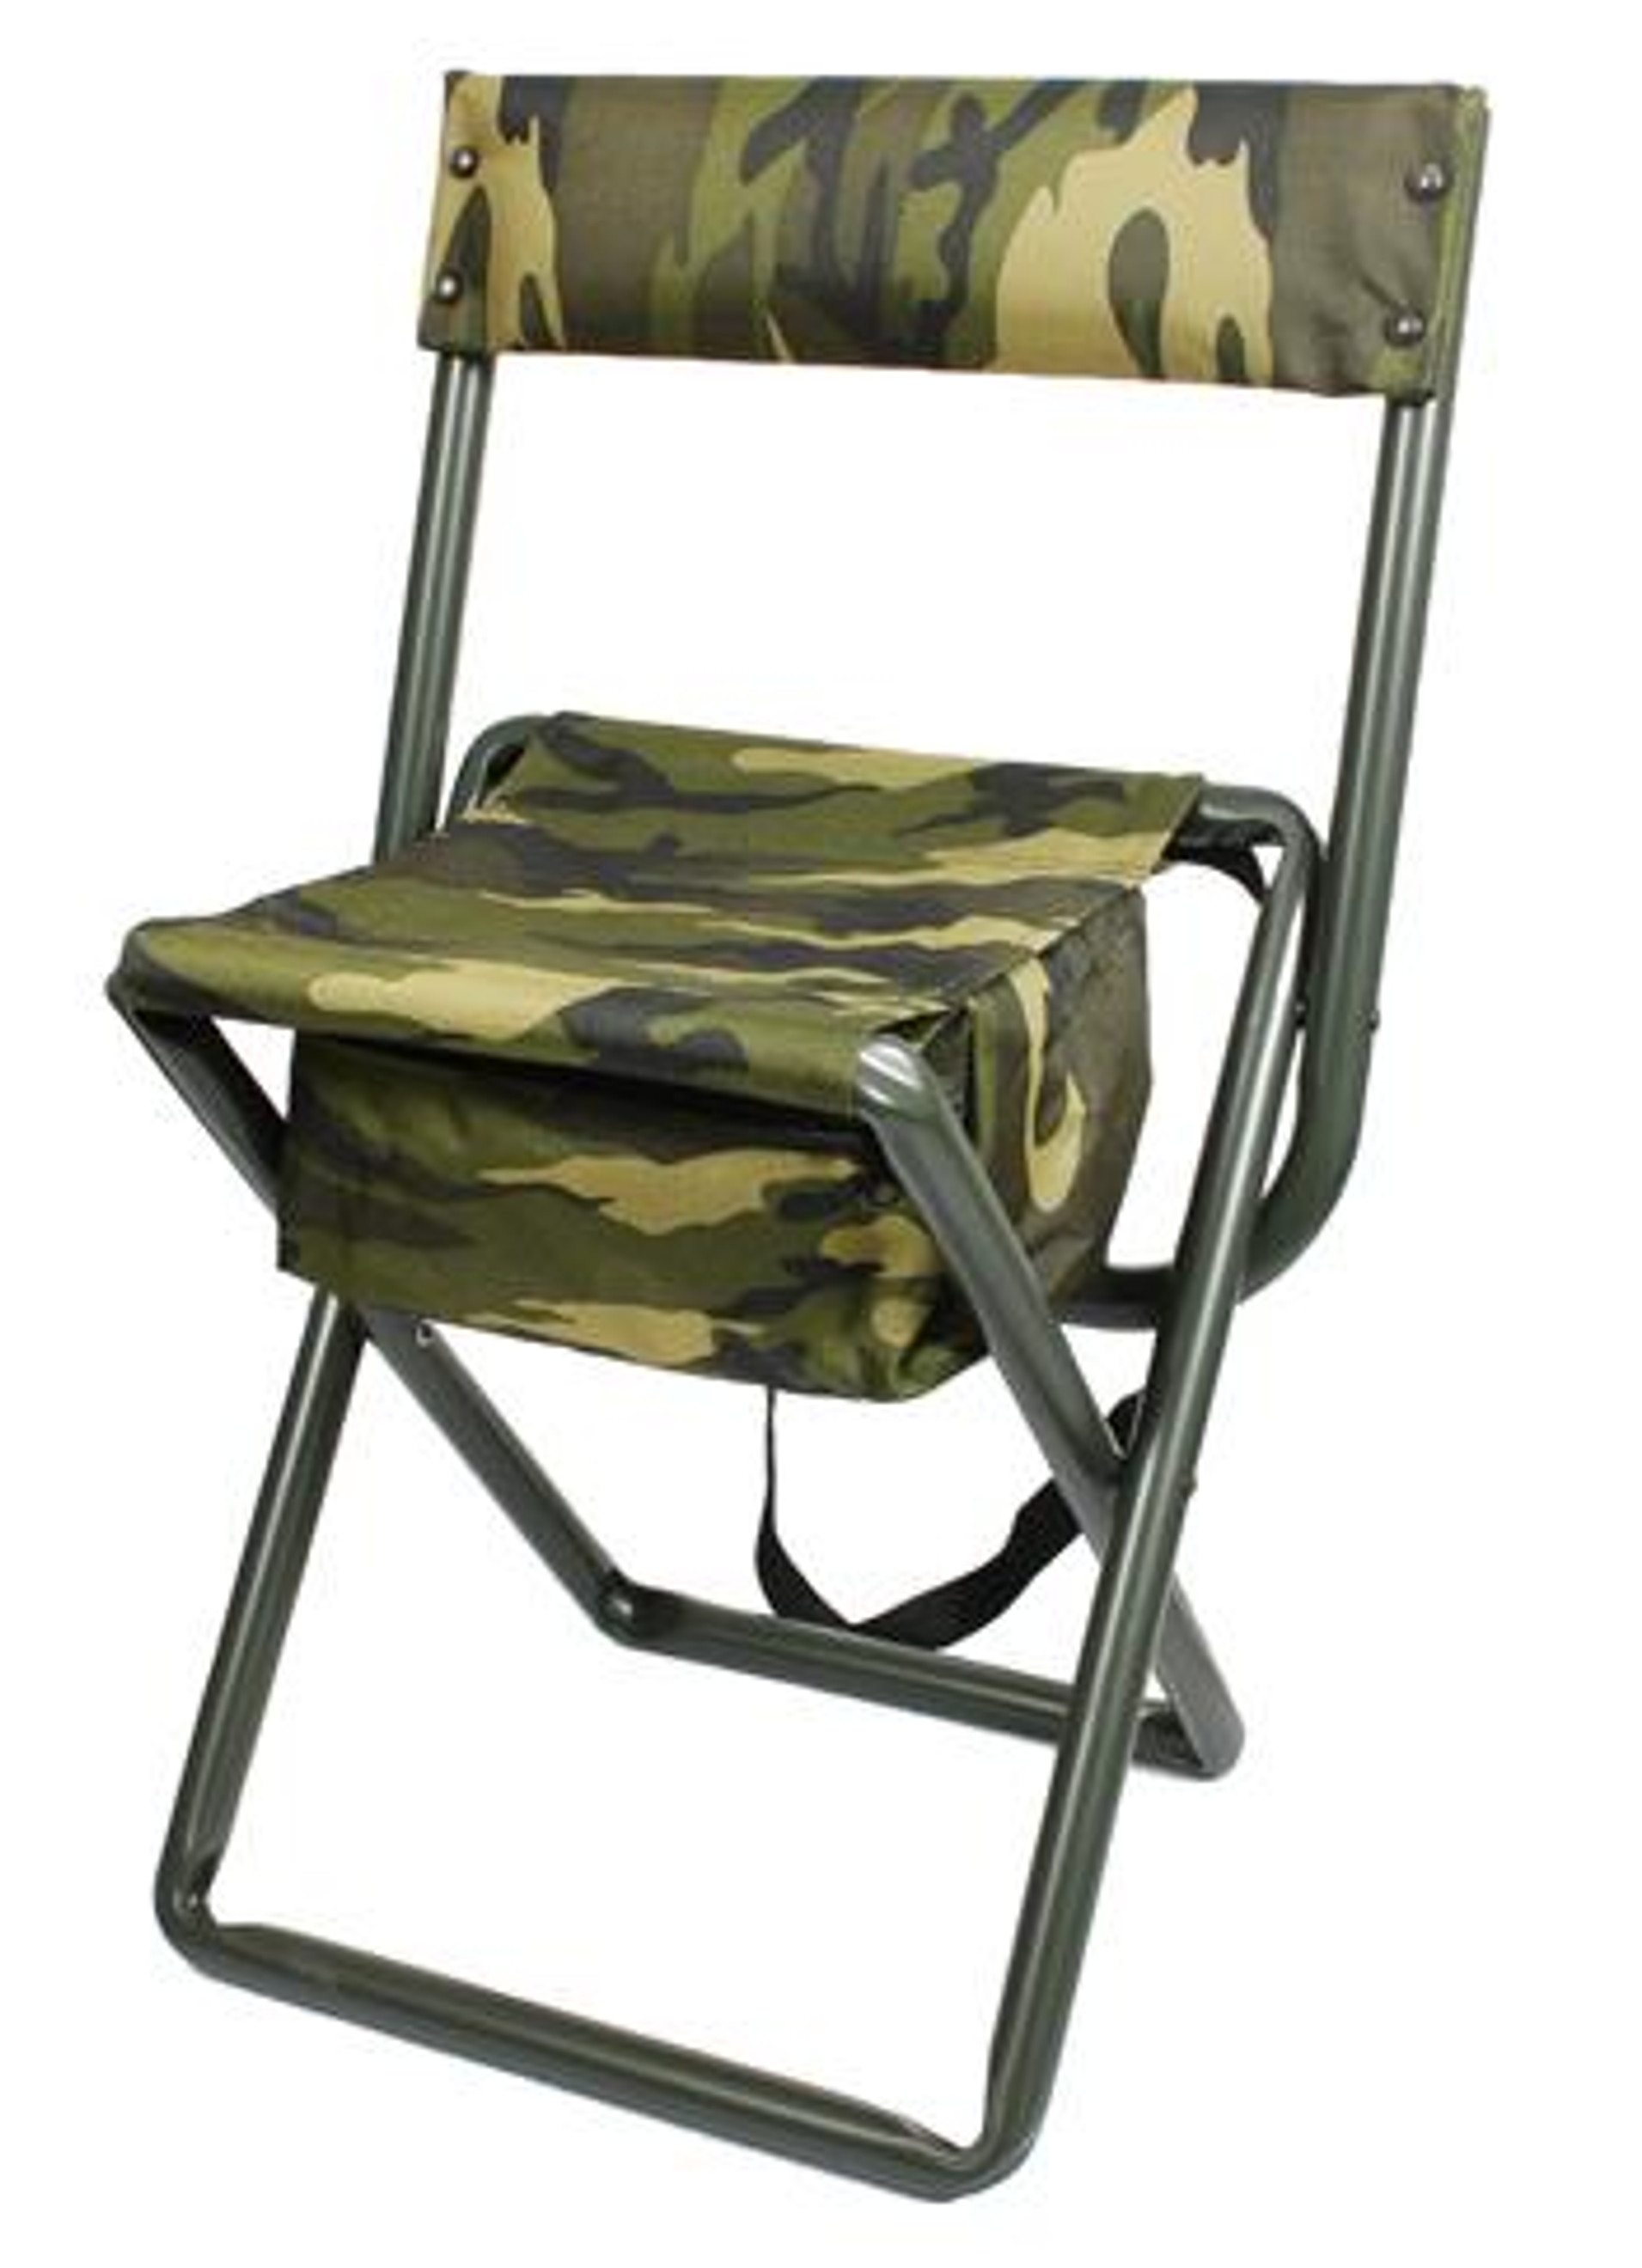 Rothco Deluxe Folding Stool With Pouch - Woodland Camo